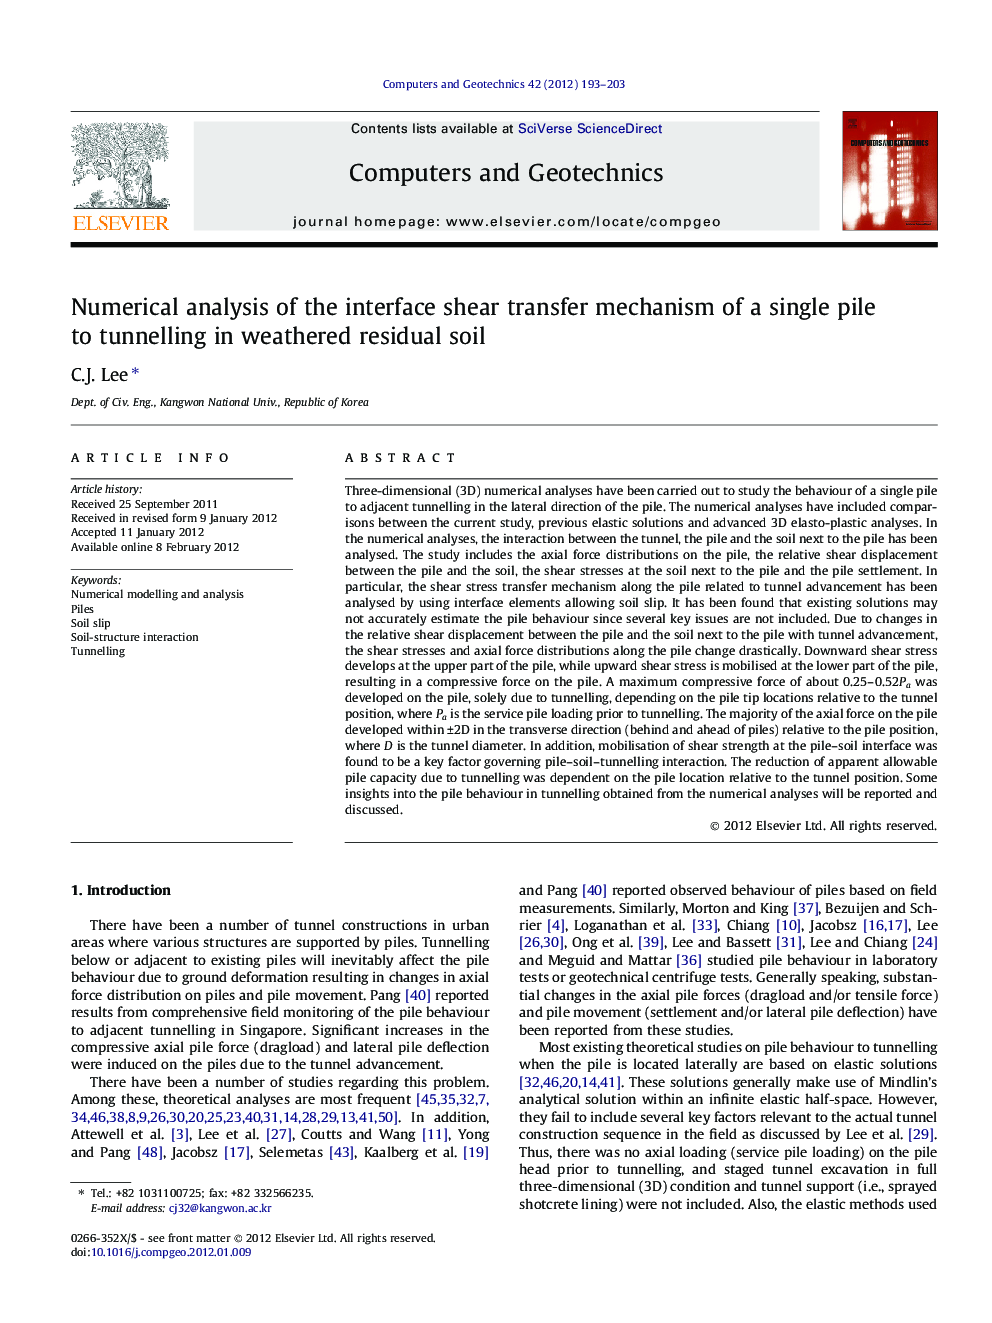 Numerical analysis of the interface shear transfer mechanism of a single pile to tunnelling in weathered residual soil